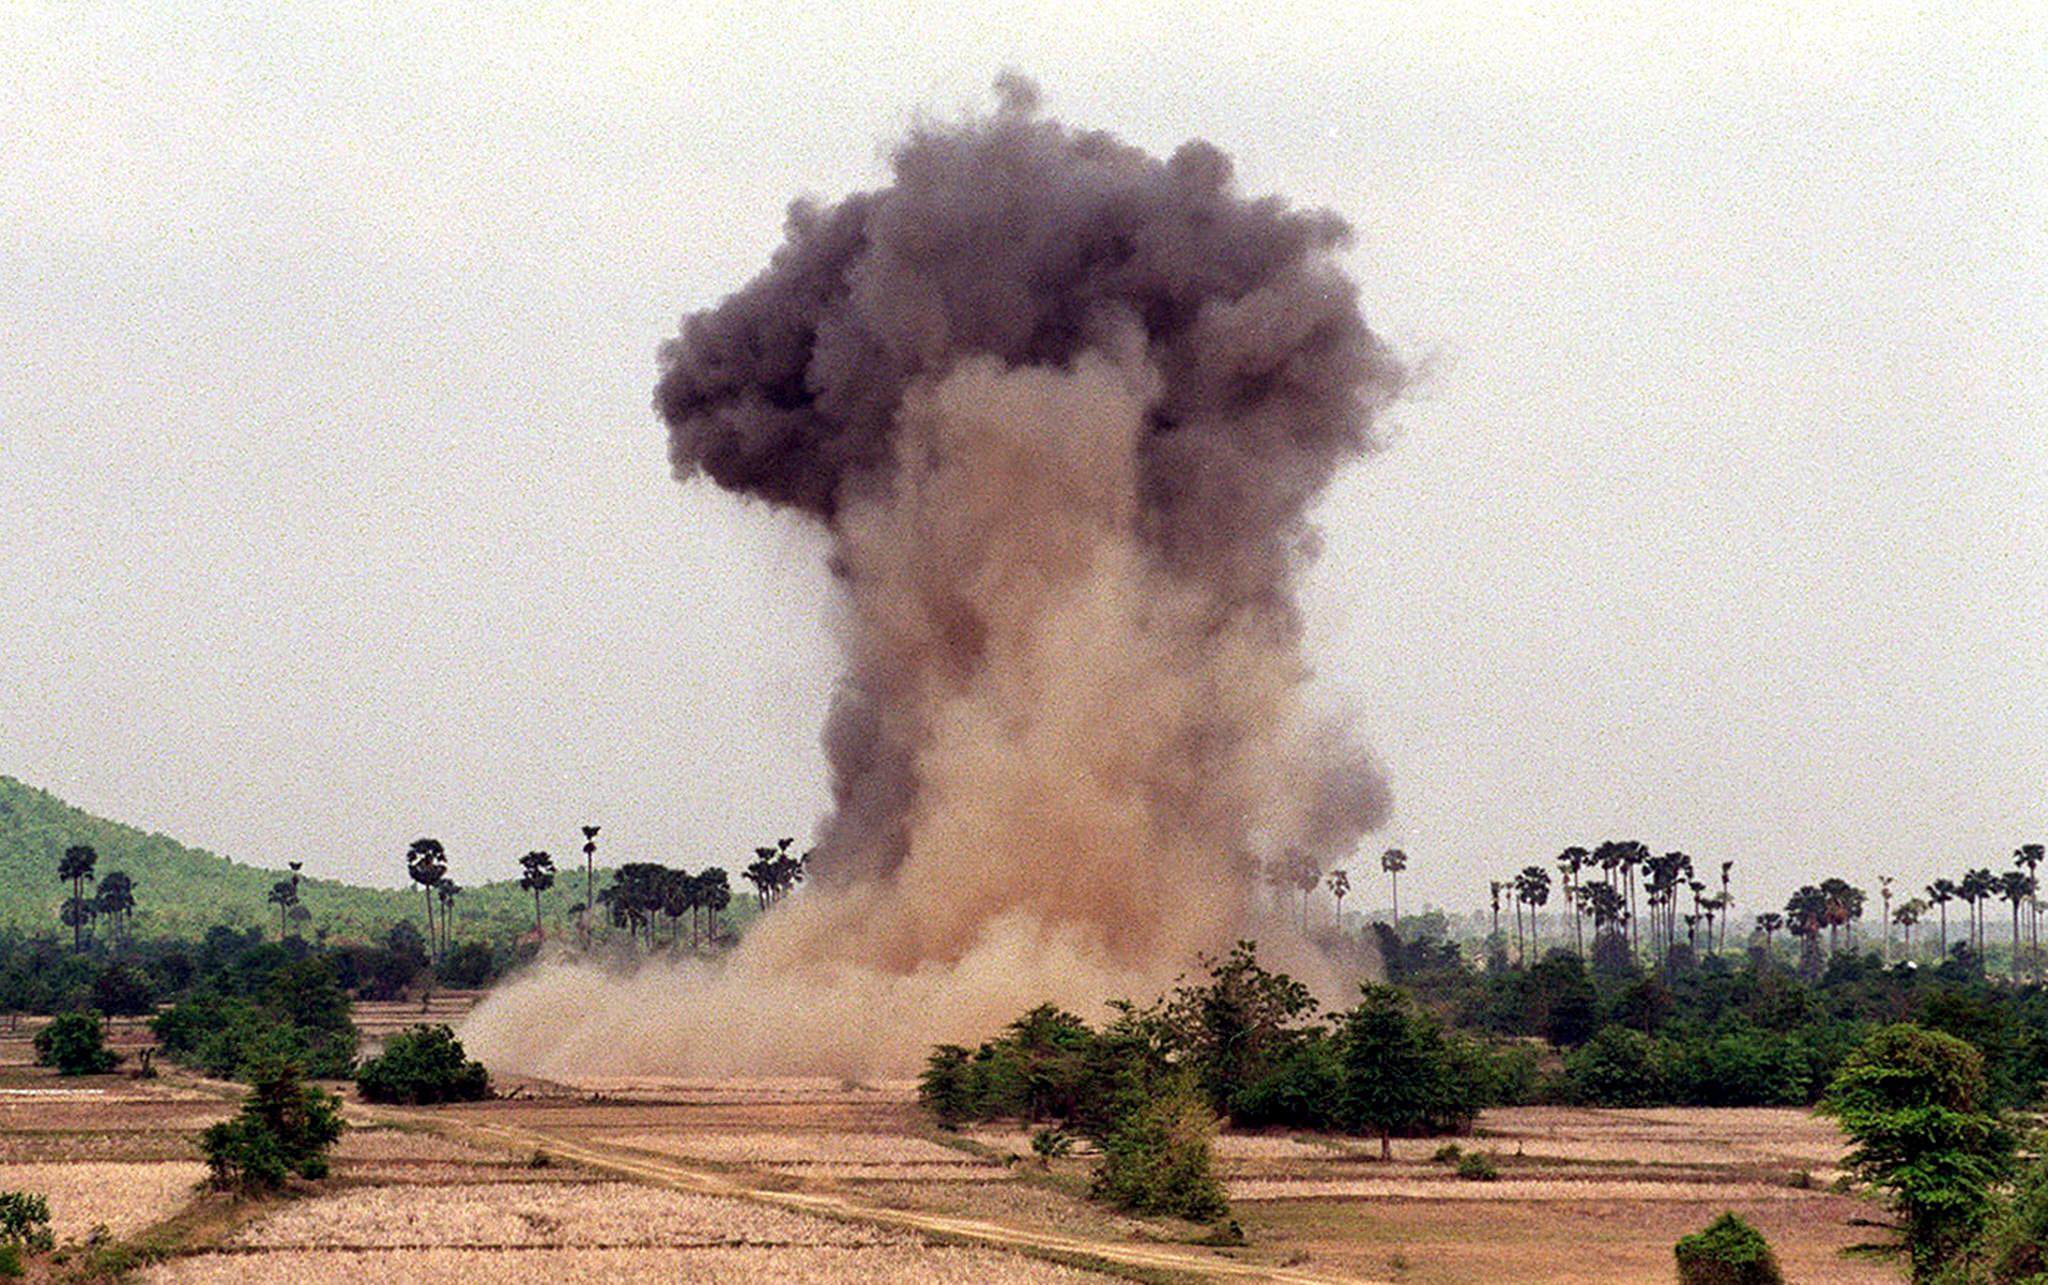 A cloud of dust and smoke rises from a cache of unexploded ordinance detonated by deminers in Cambodia in 2004. Photo: AFP